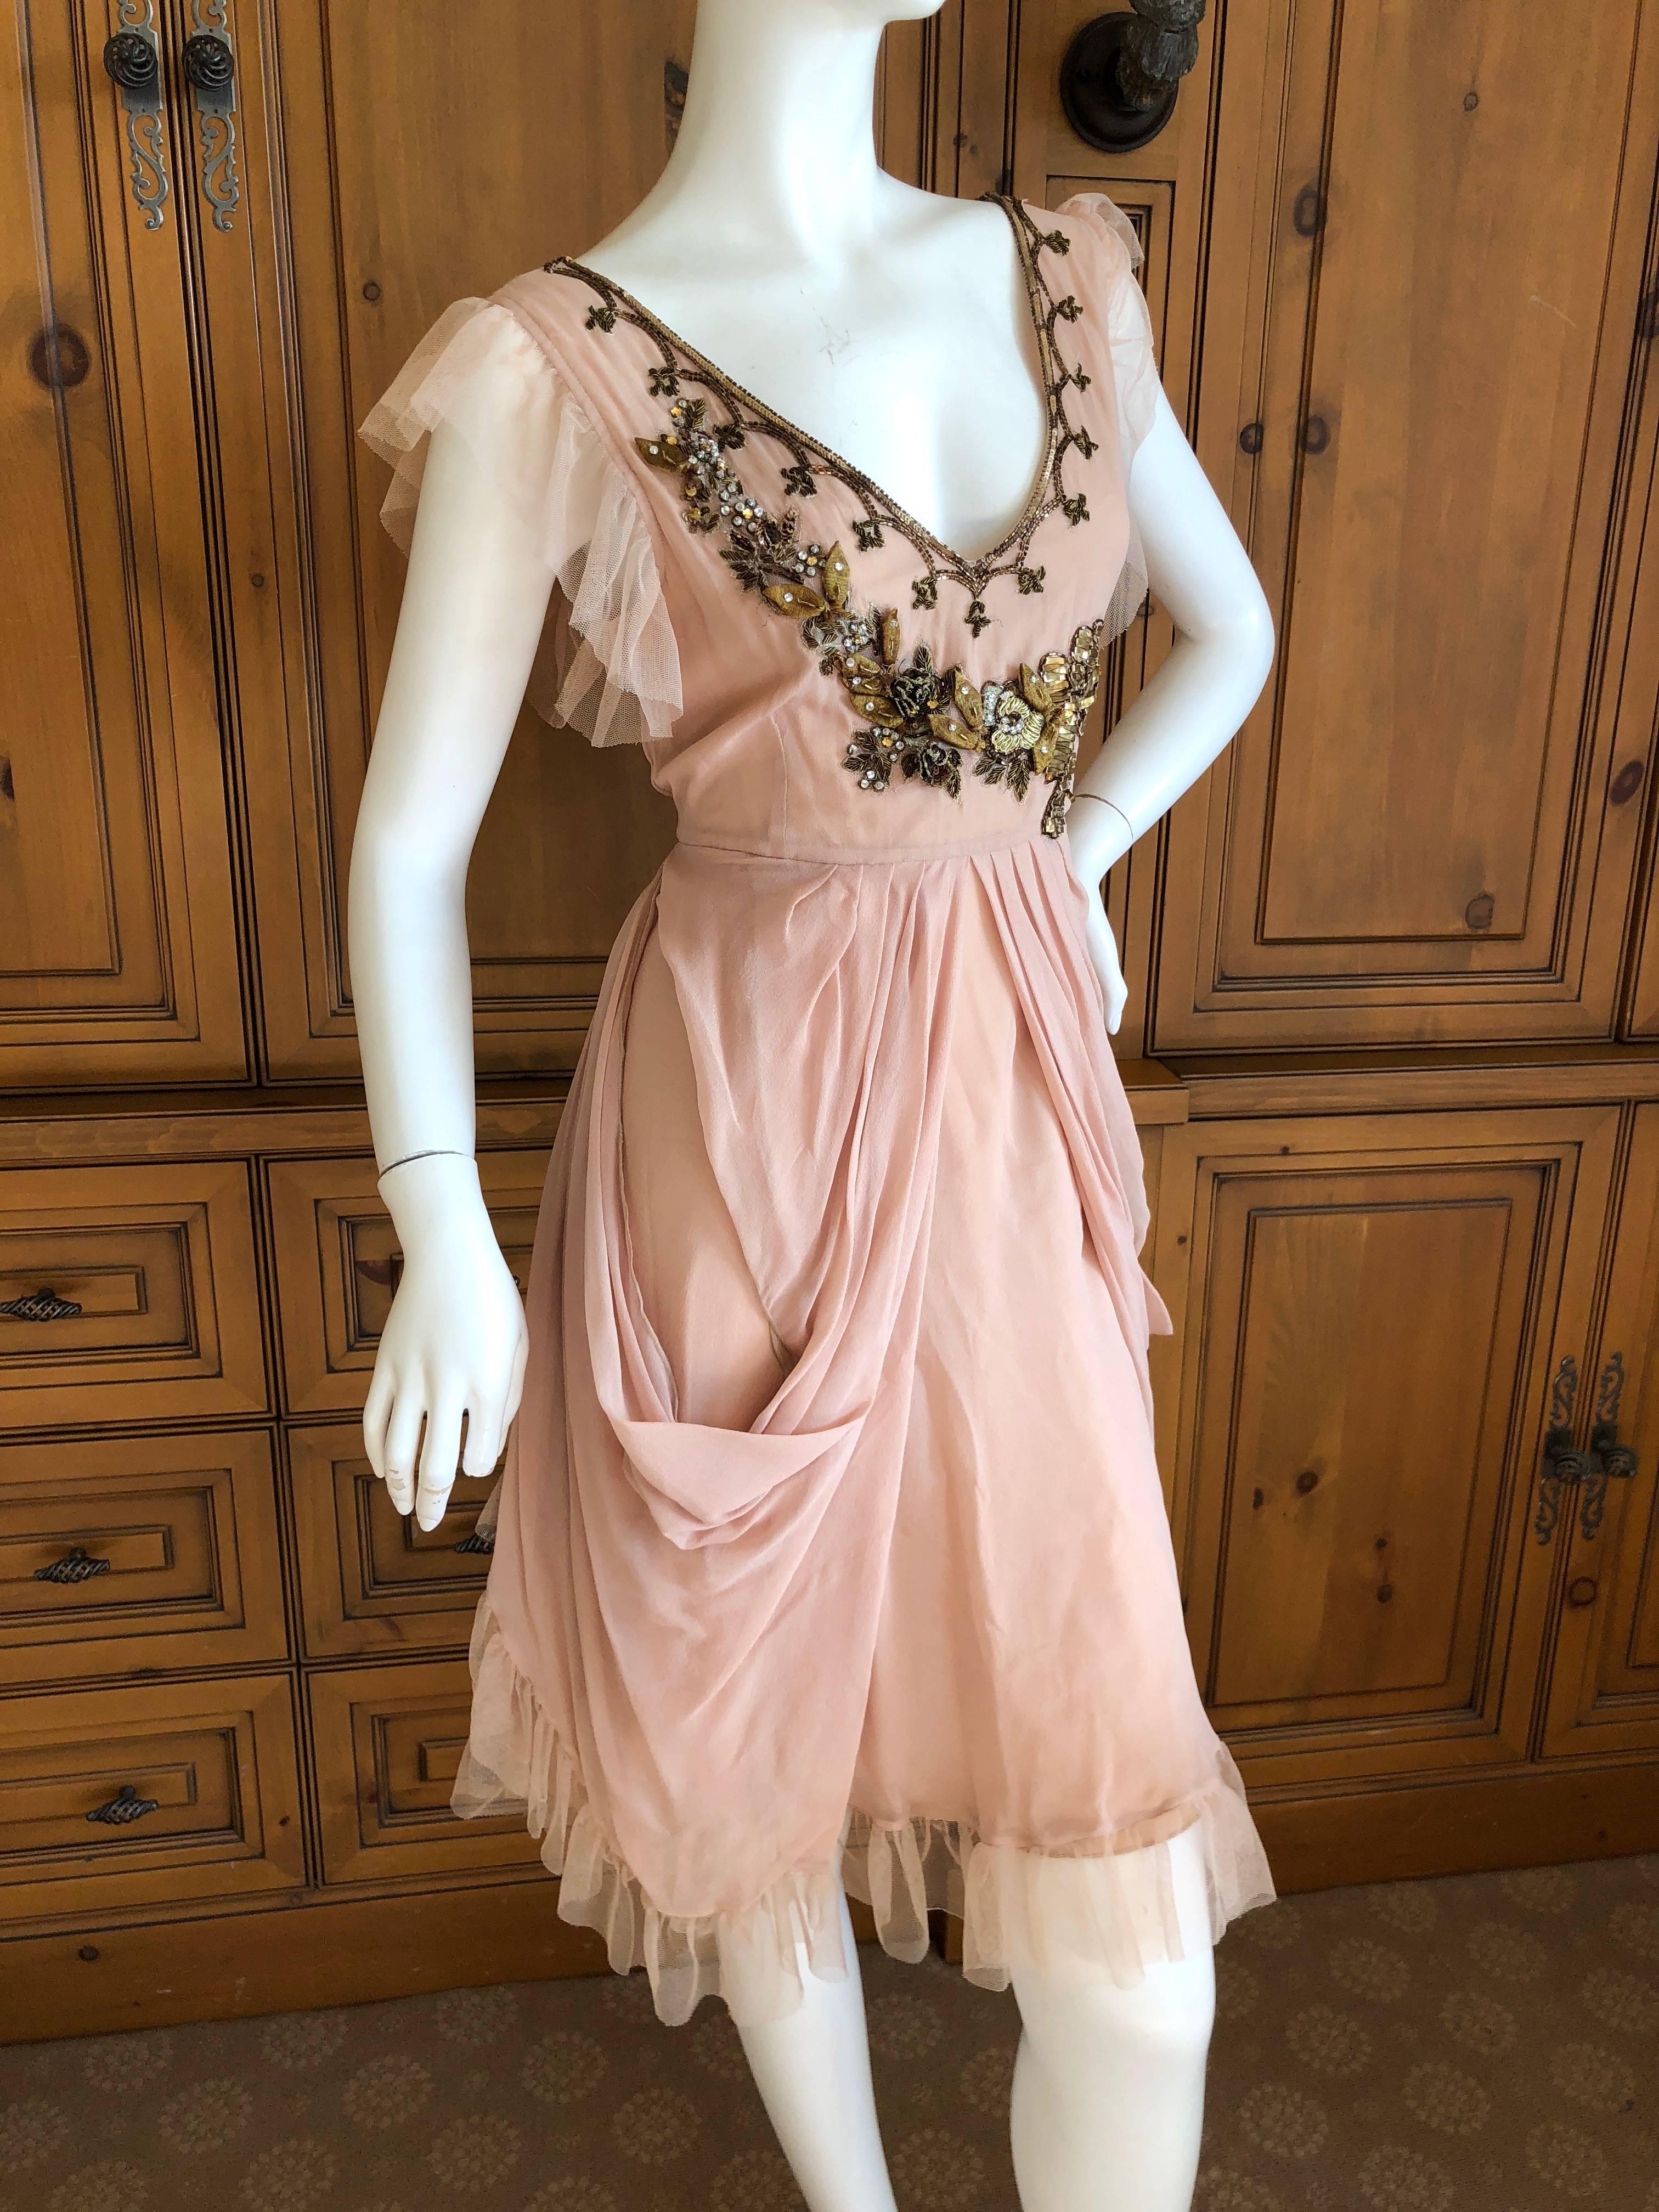 John Galliano Vintage Embellished Draped Cocktail Dress New With Tags For Sale 1